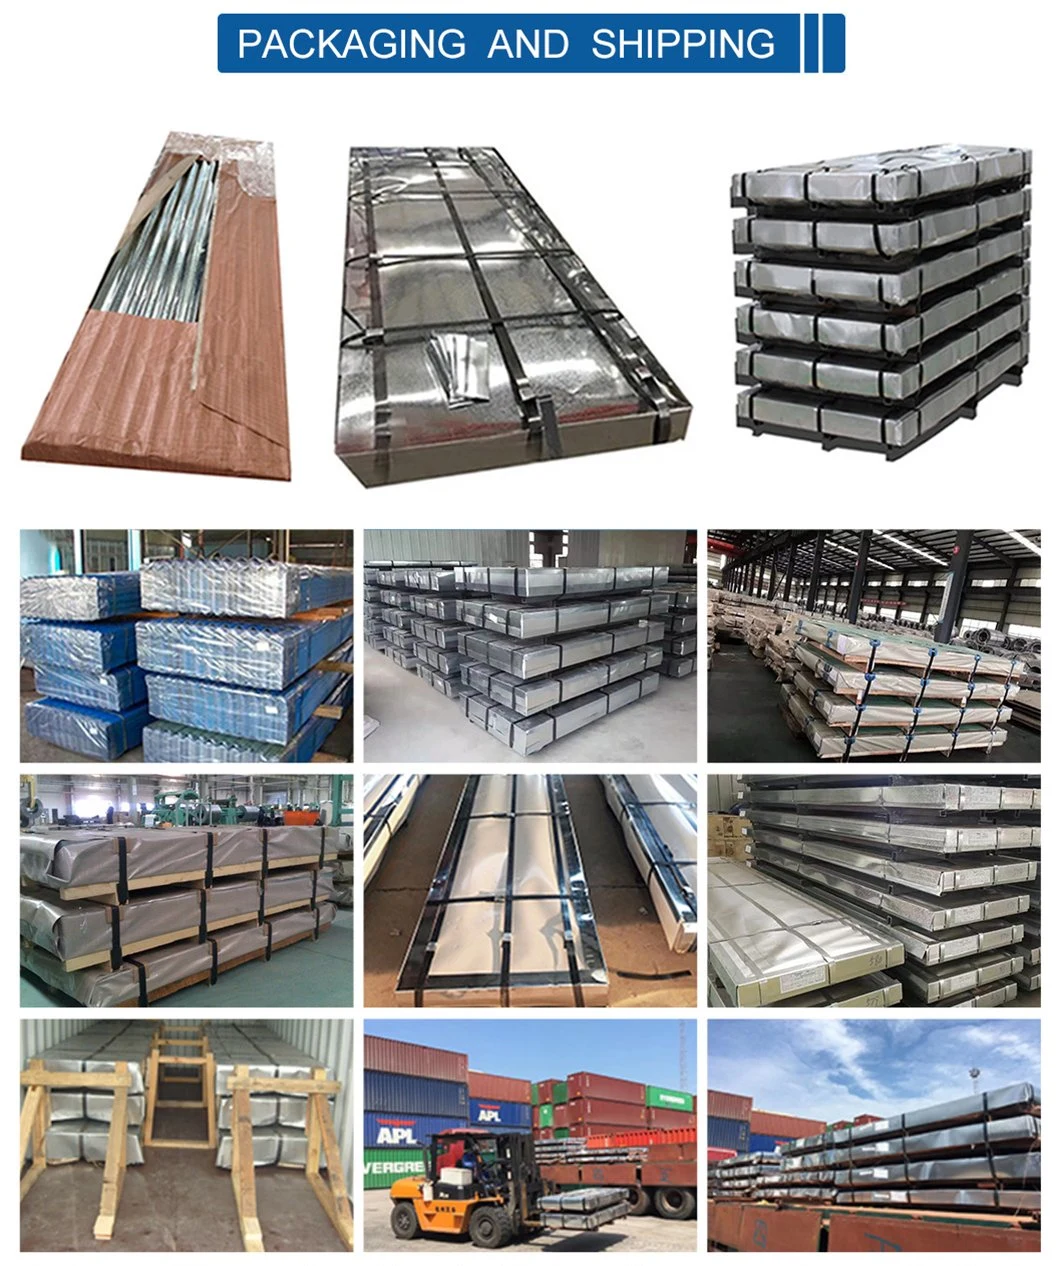 Factory Price PPGI Prepainted Roofing Material in Steel Sheet/Prepainted PPGI Roofing Steel Sheet in Stock